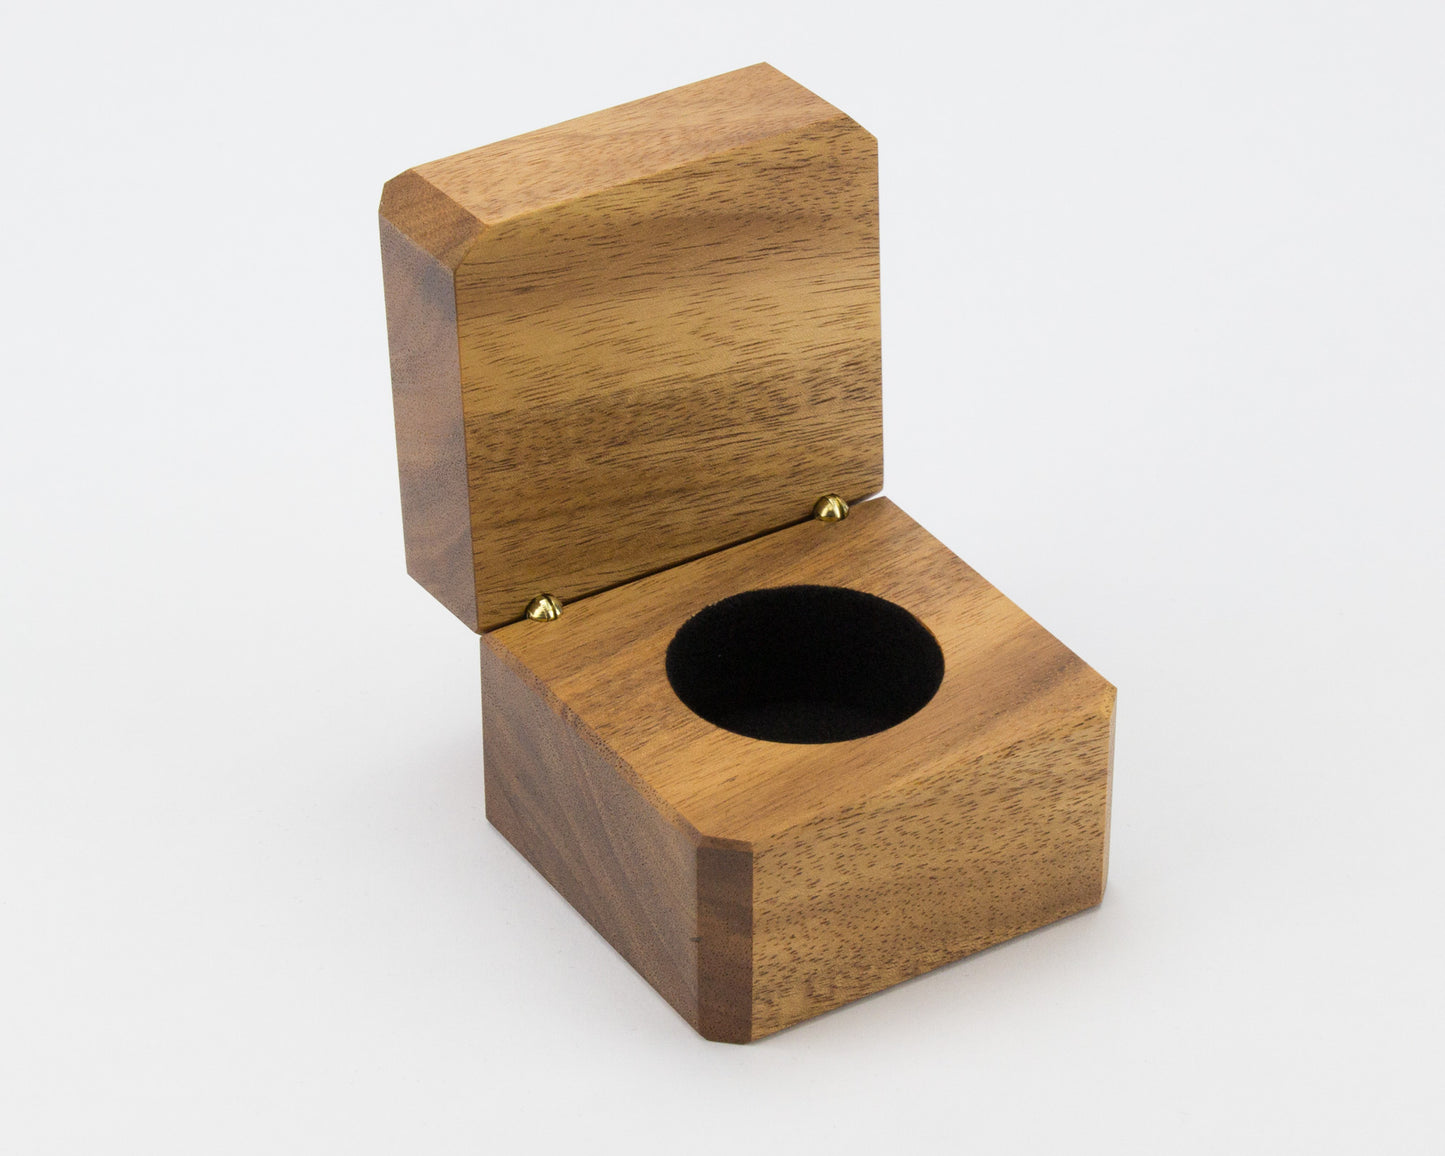 The Elegance wooden ring box handcrafted from Blackwood timber